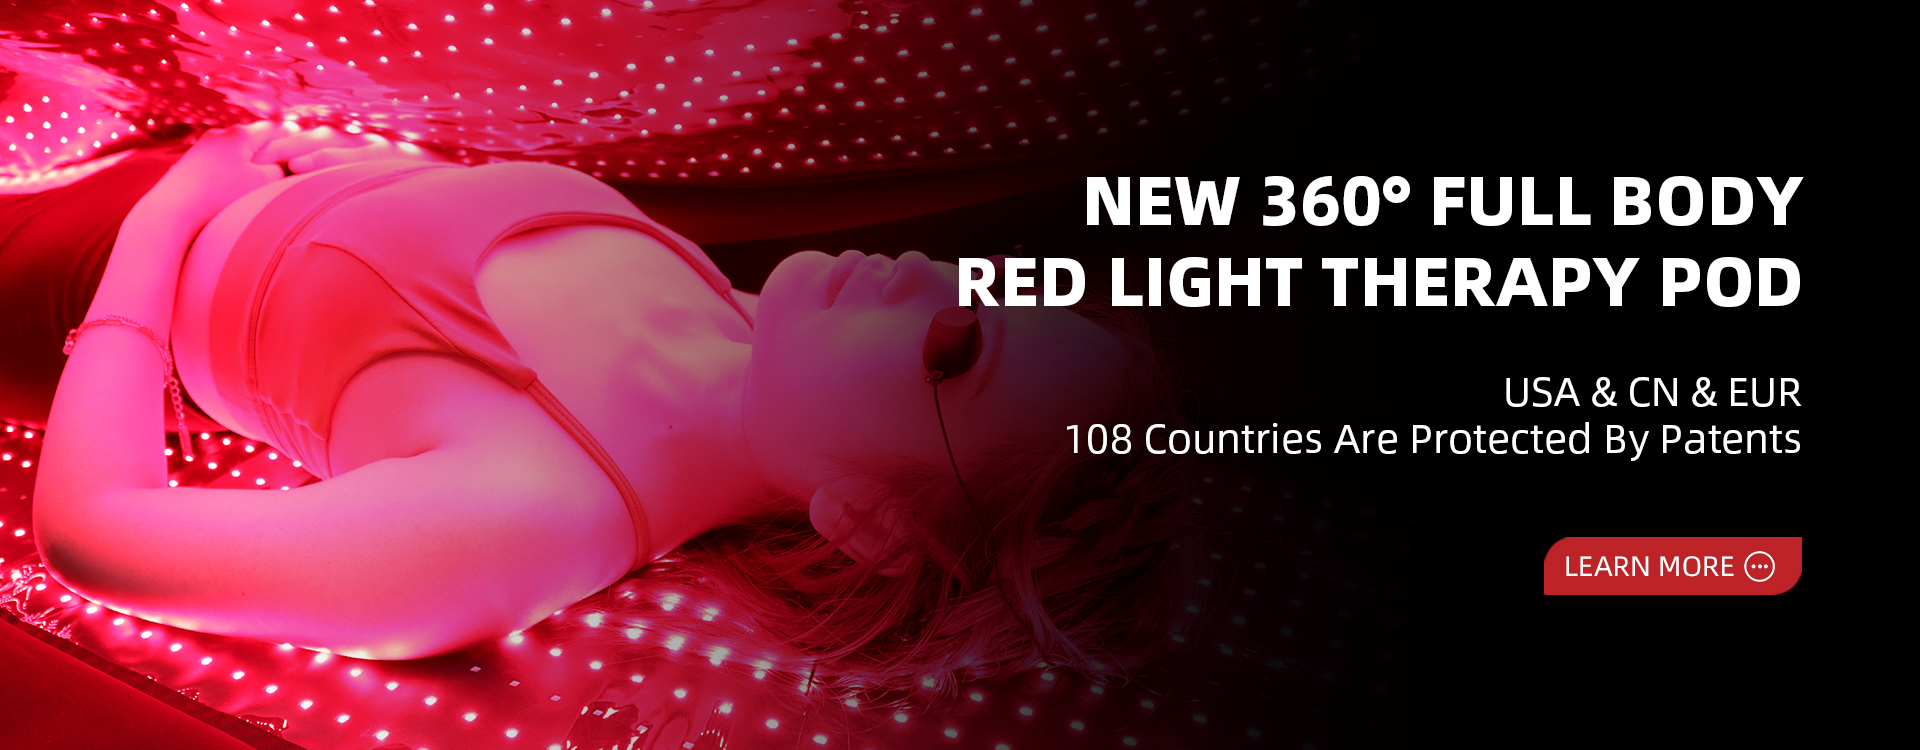 Top Leading Red Light Therapy Manufacturer